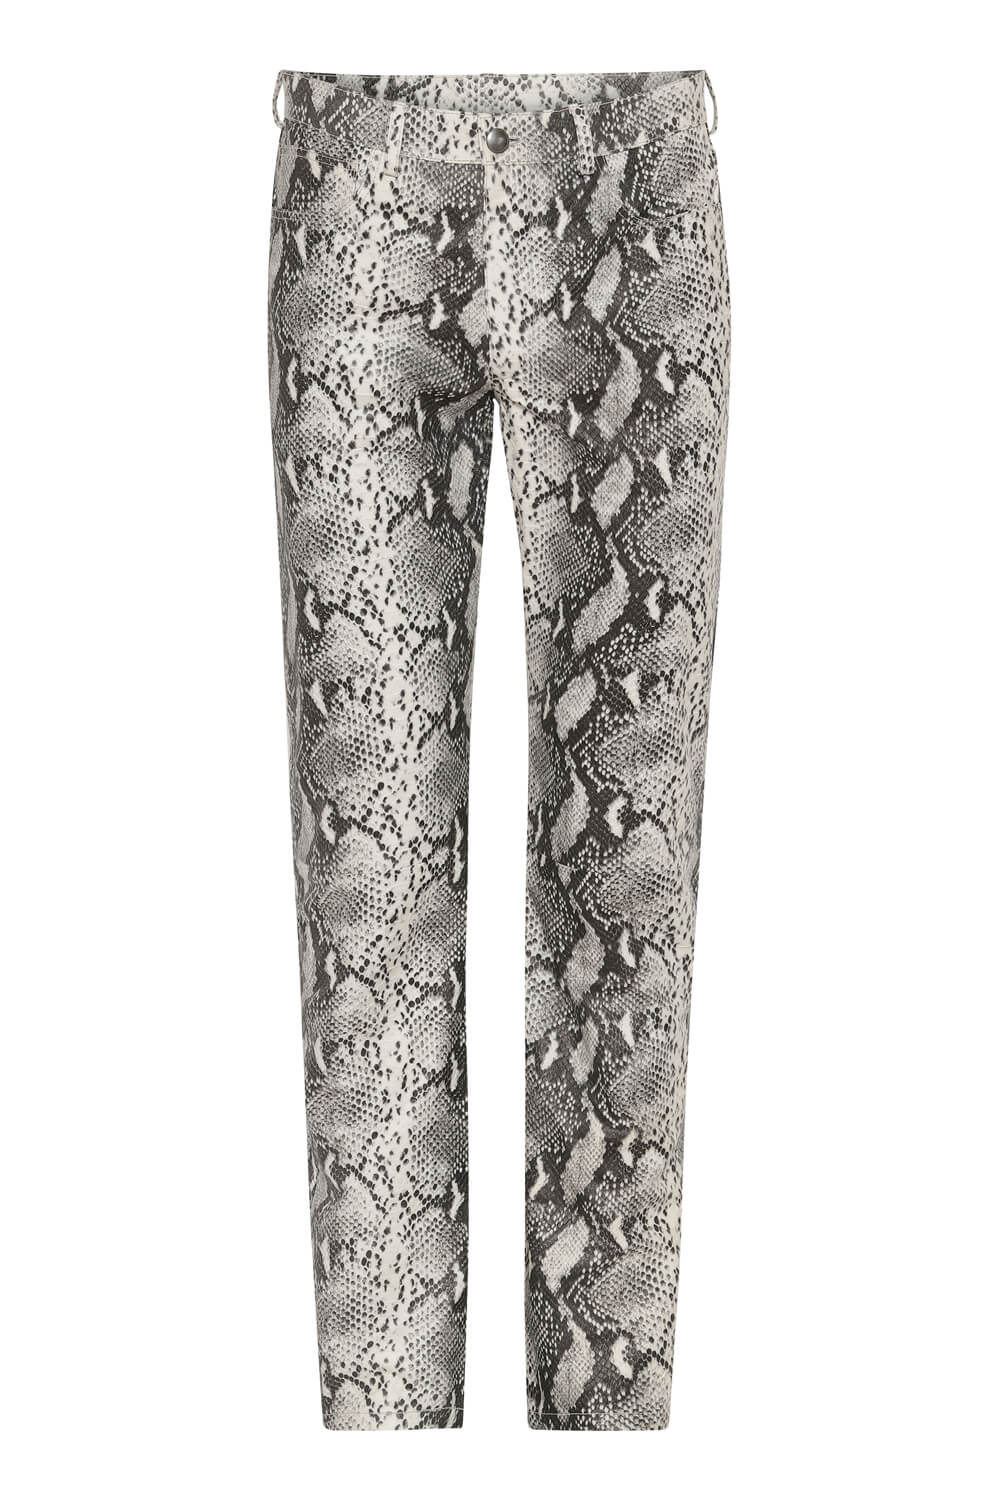 Snake Print Faux Leather Pants | Nasty Gal